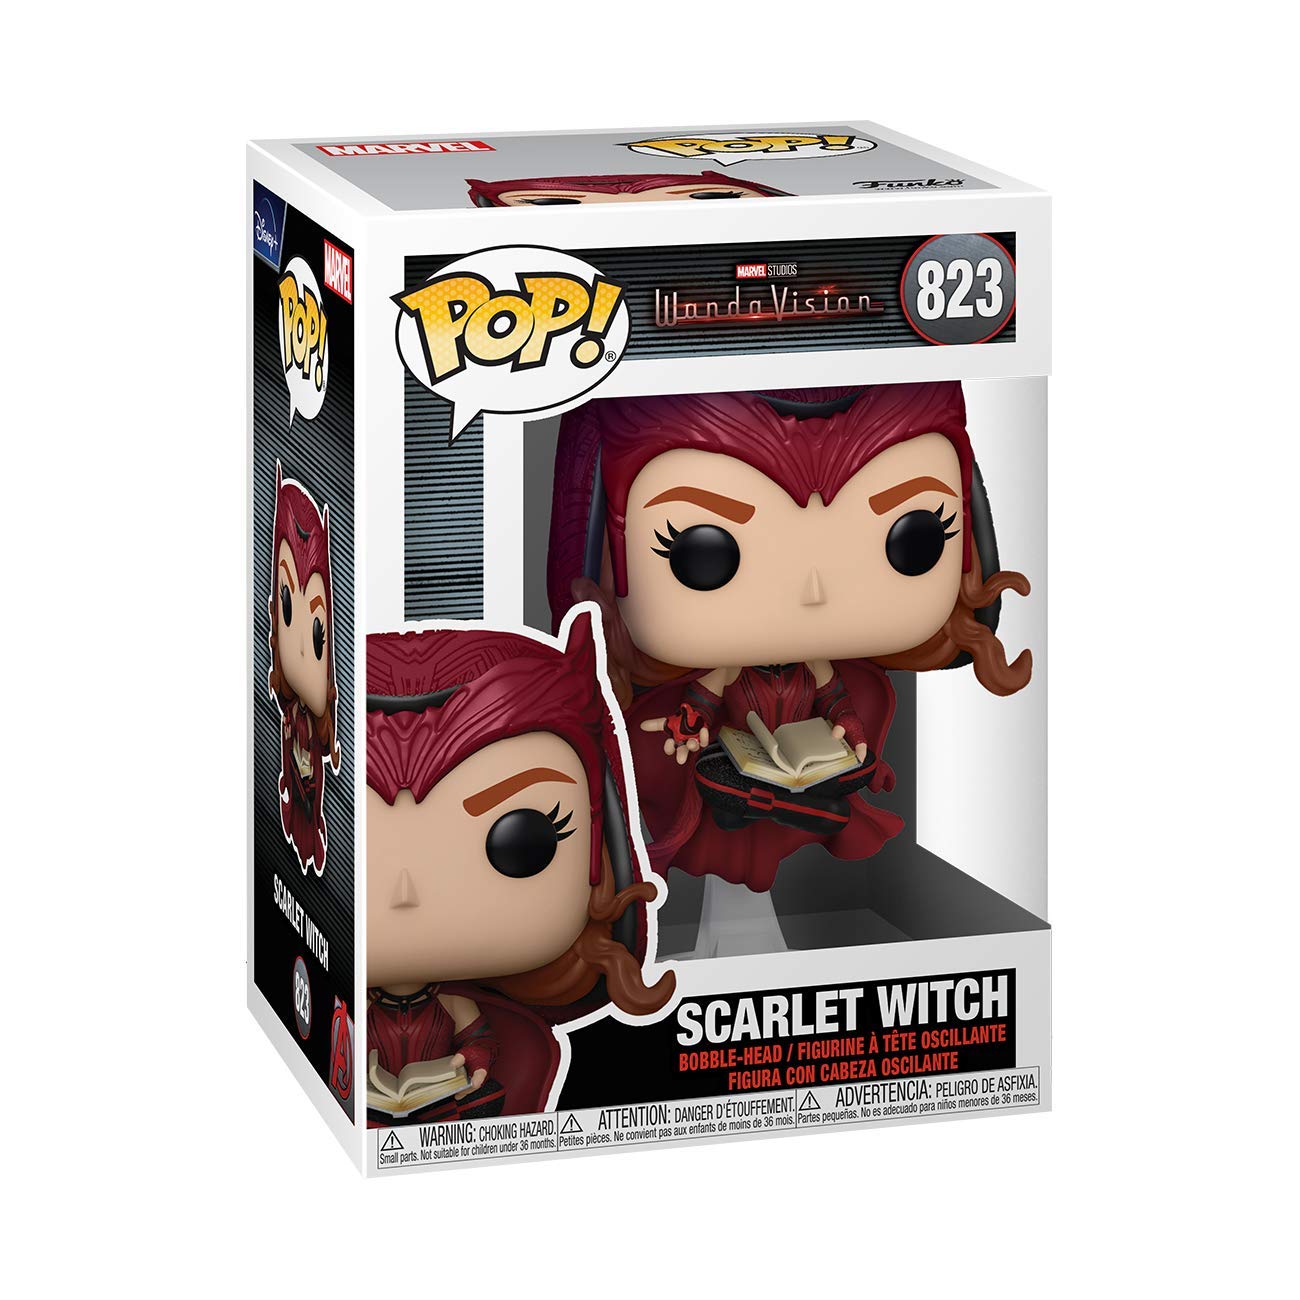 Funko Pop! Marvel: WandaVision - The Scarlet Witch Vinyl Collectible Figure